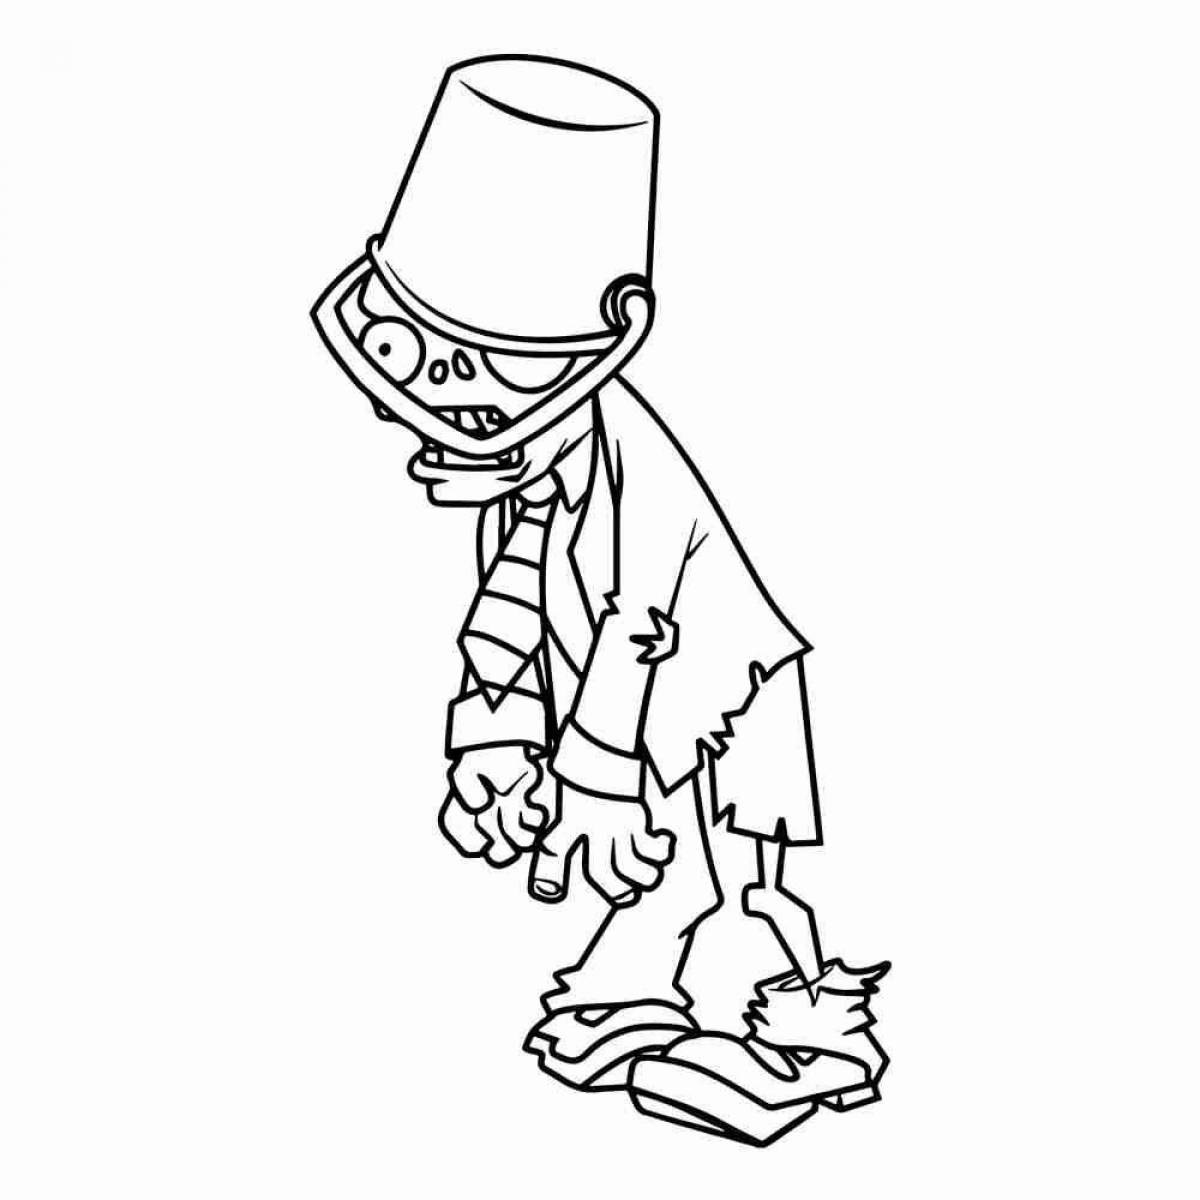 Coloring page shocking zombie planet